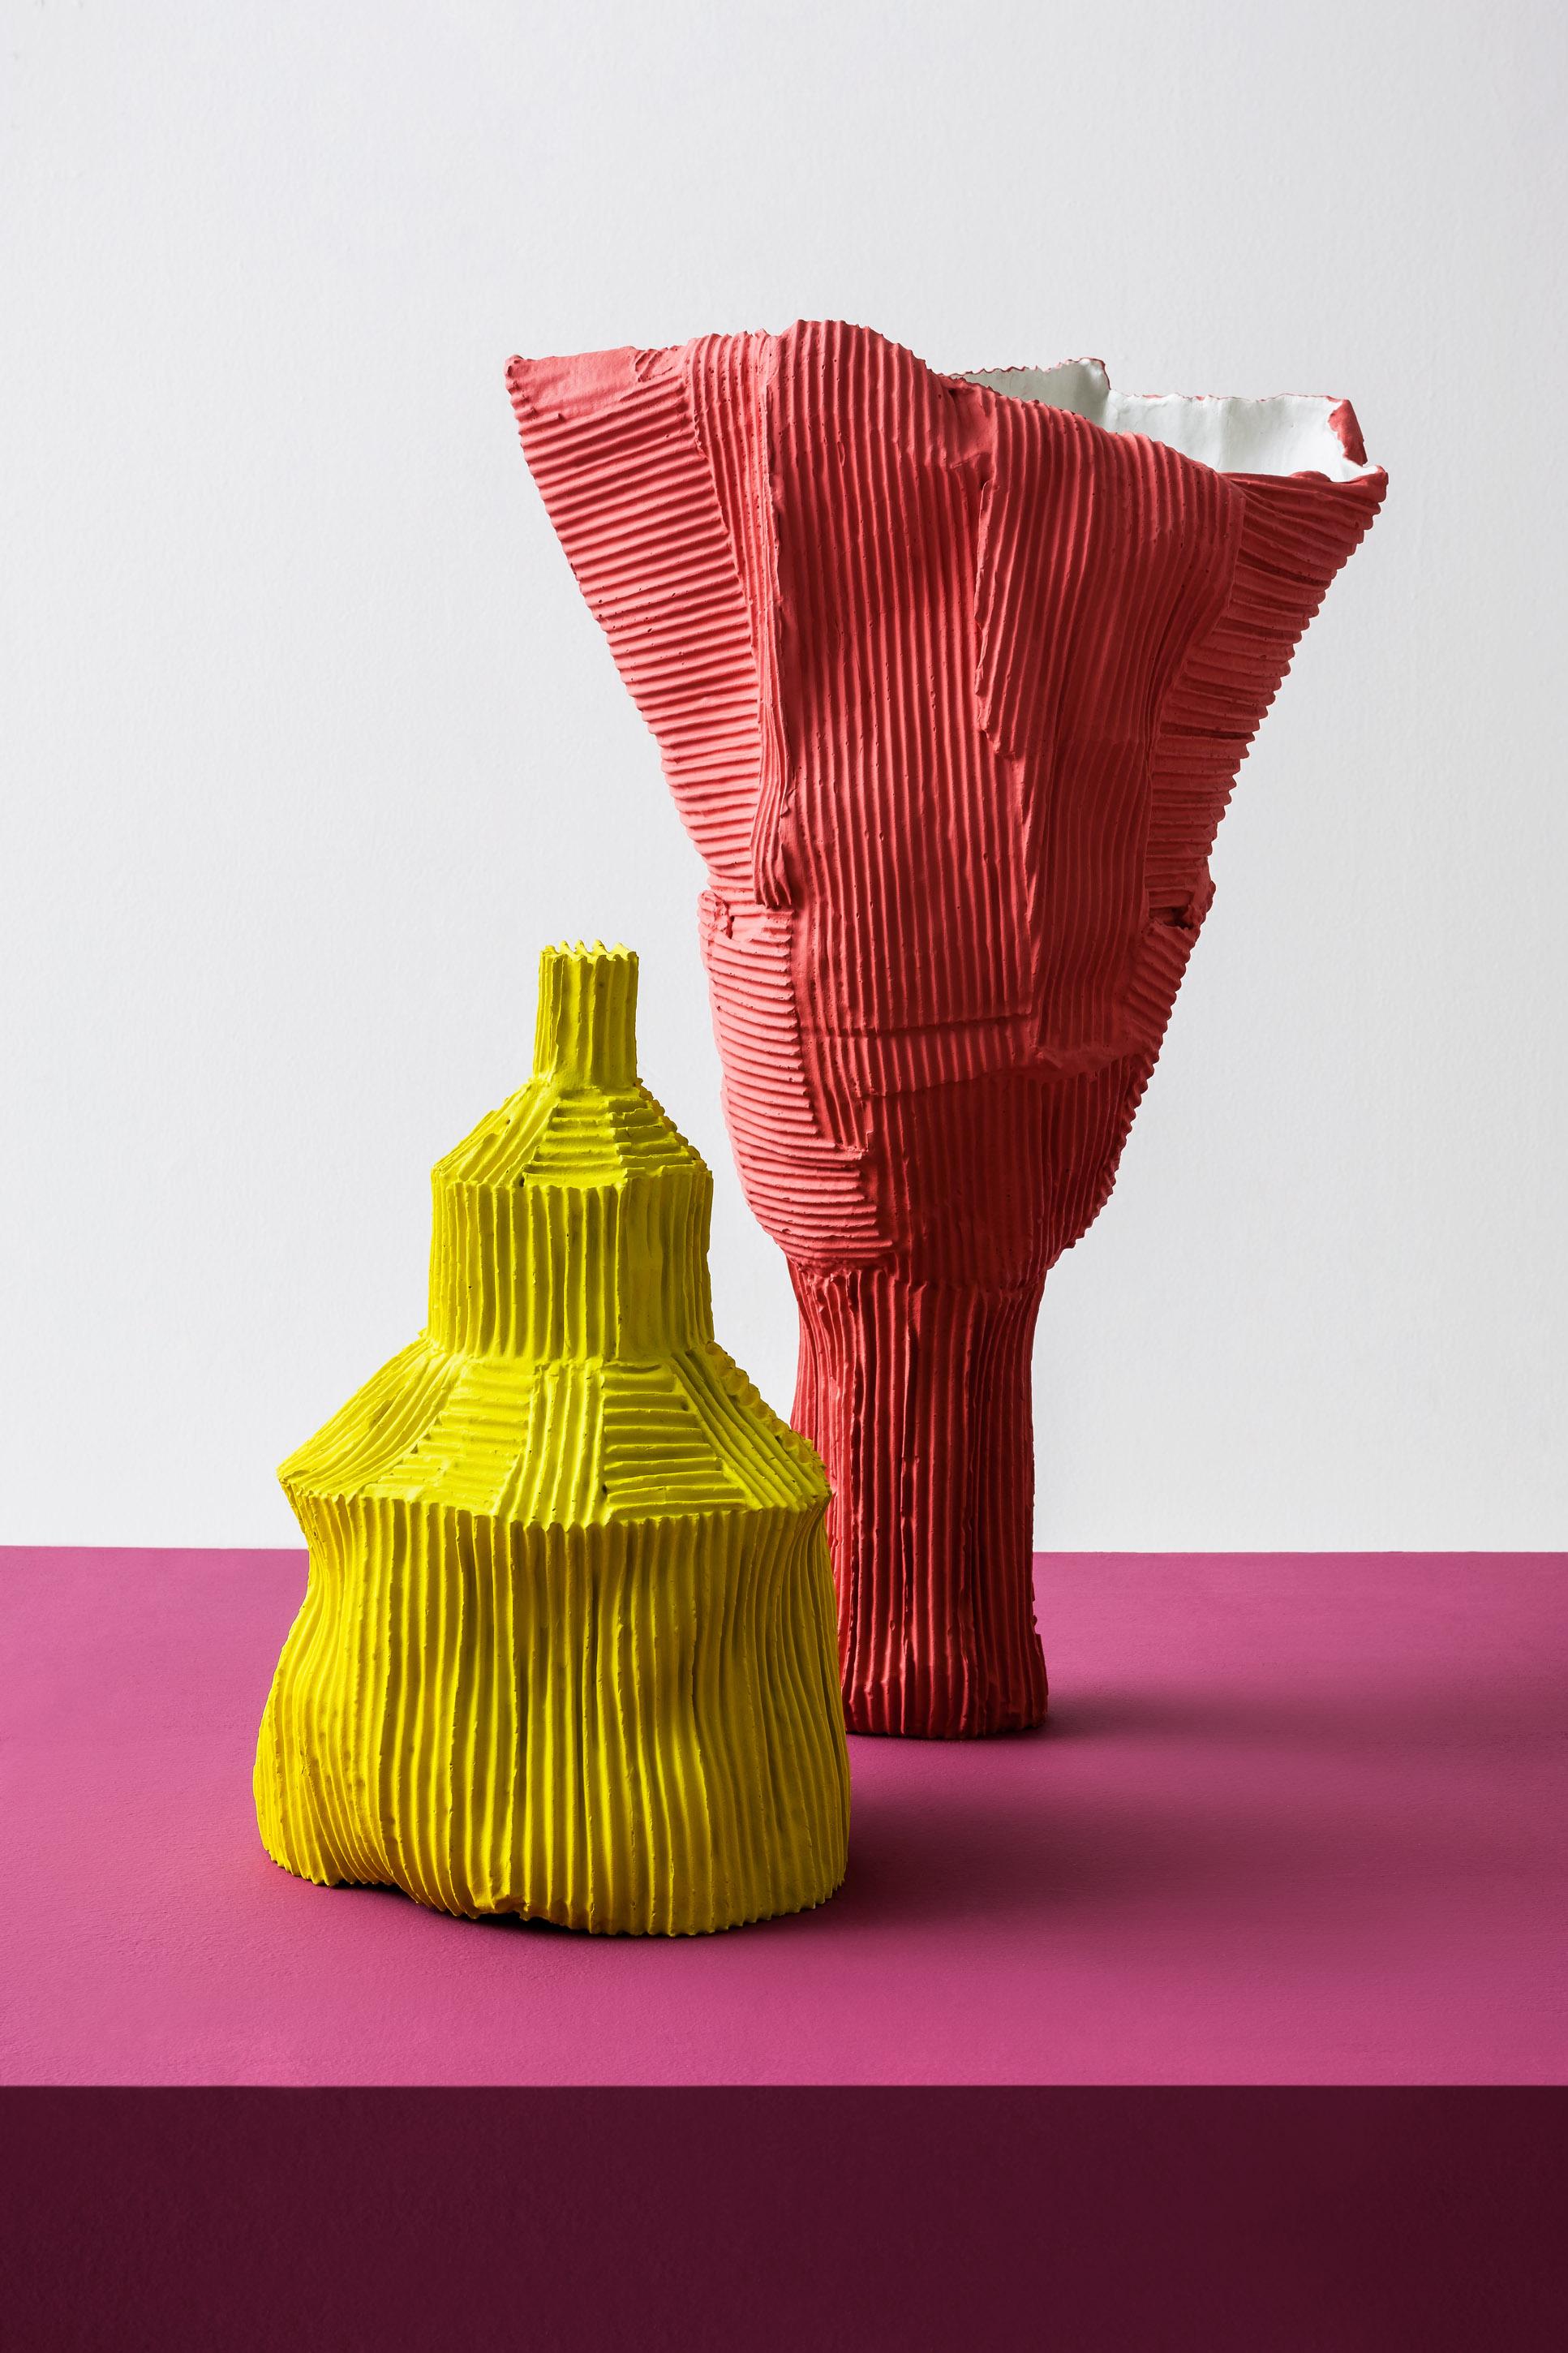 Merging modern design with innovative artistic sensibility, this vase is a daring exercise in balance and visual harmony. Fashioned by artist Paola Paronetto using her signature paper clay (combination of paper pulp, natural fibers and clay), the